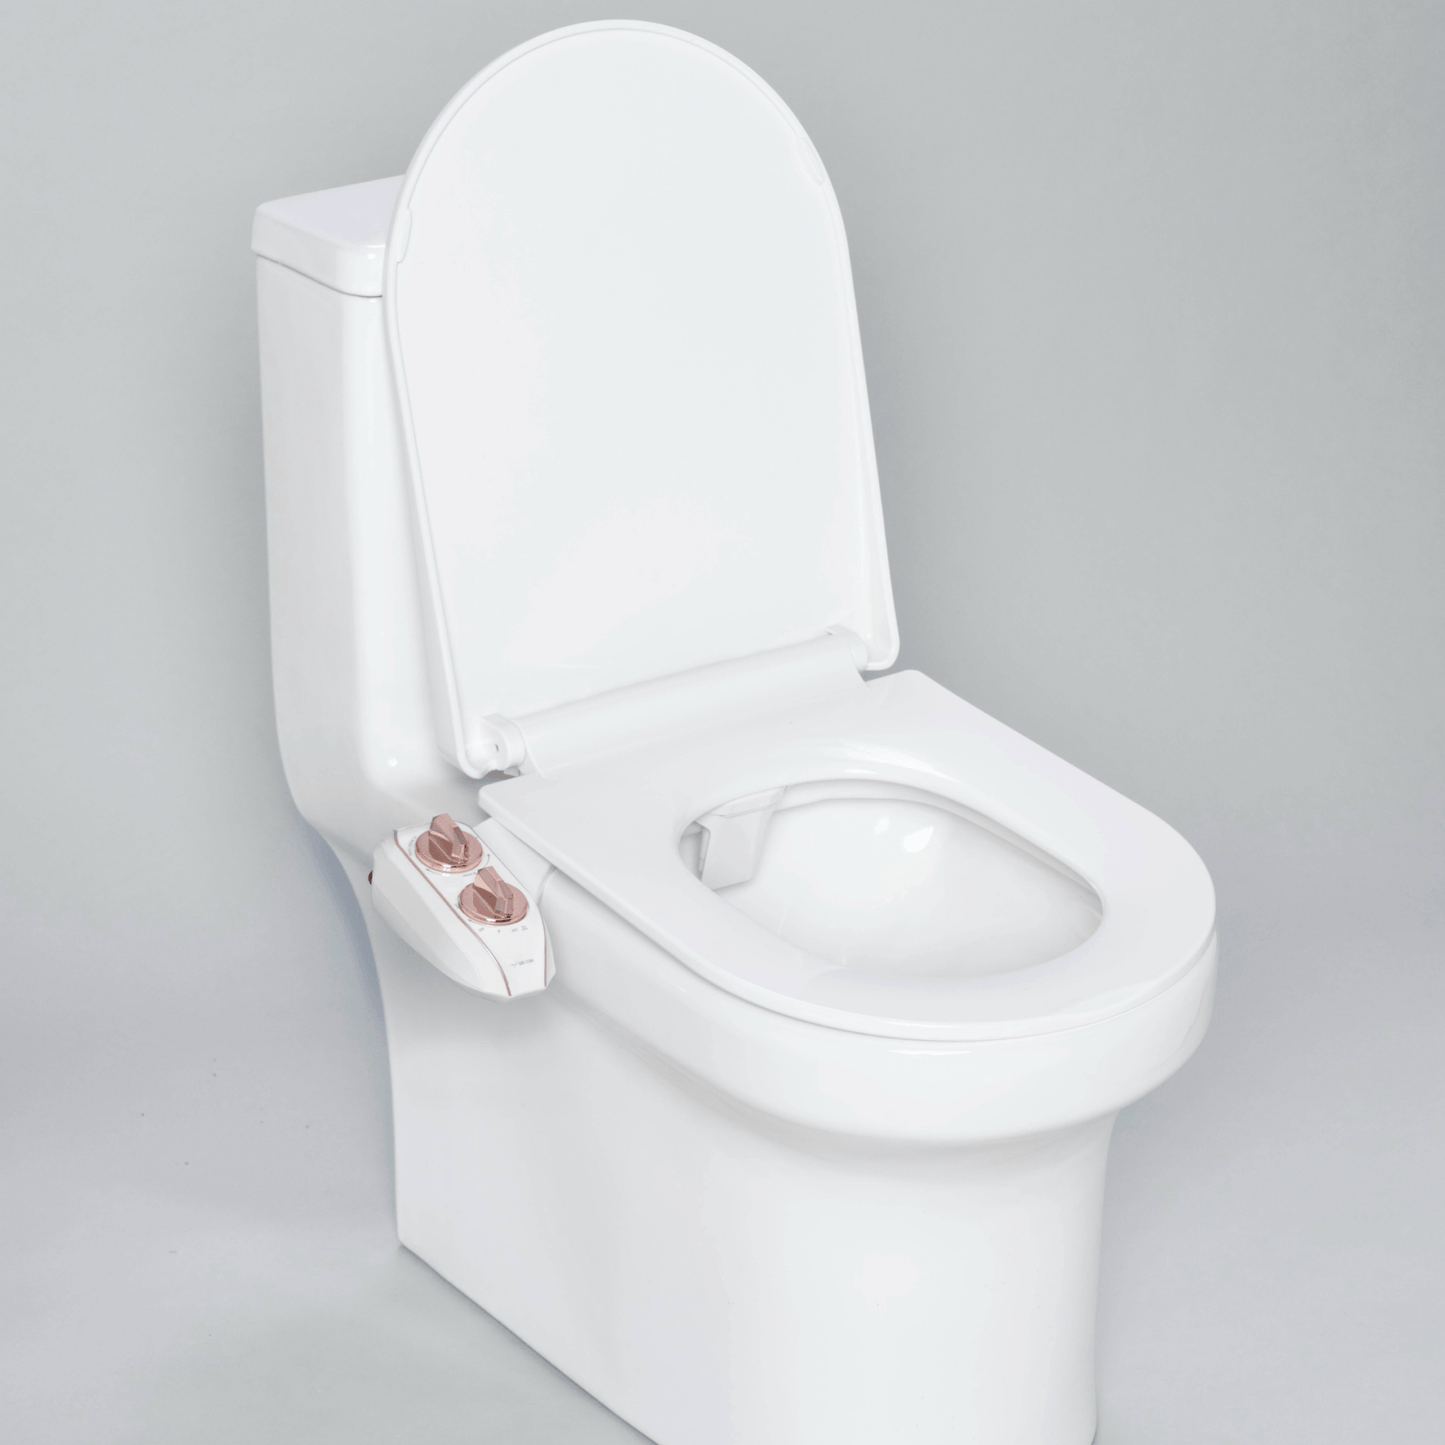 NEO 185 Plus Rose Gold installed on a modern toilet, with lid open